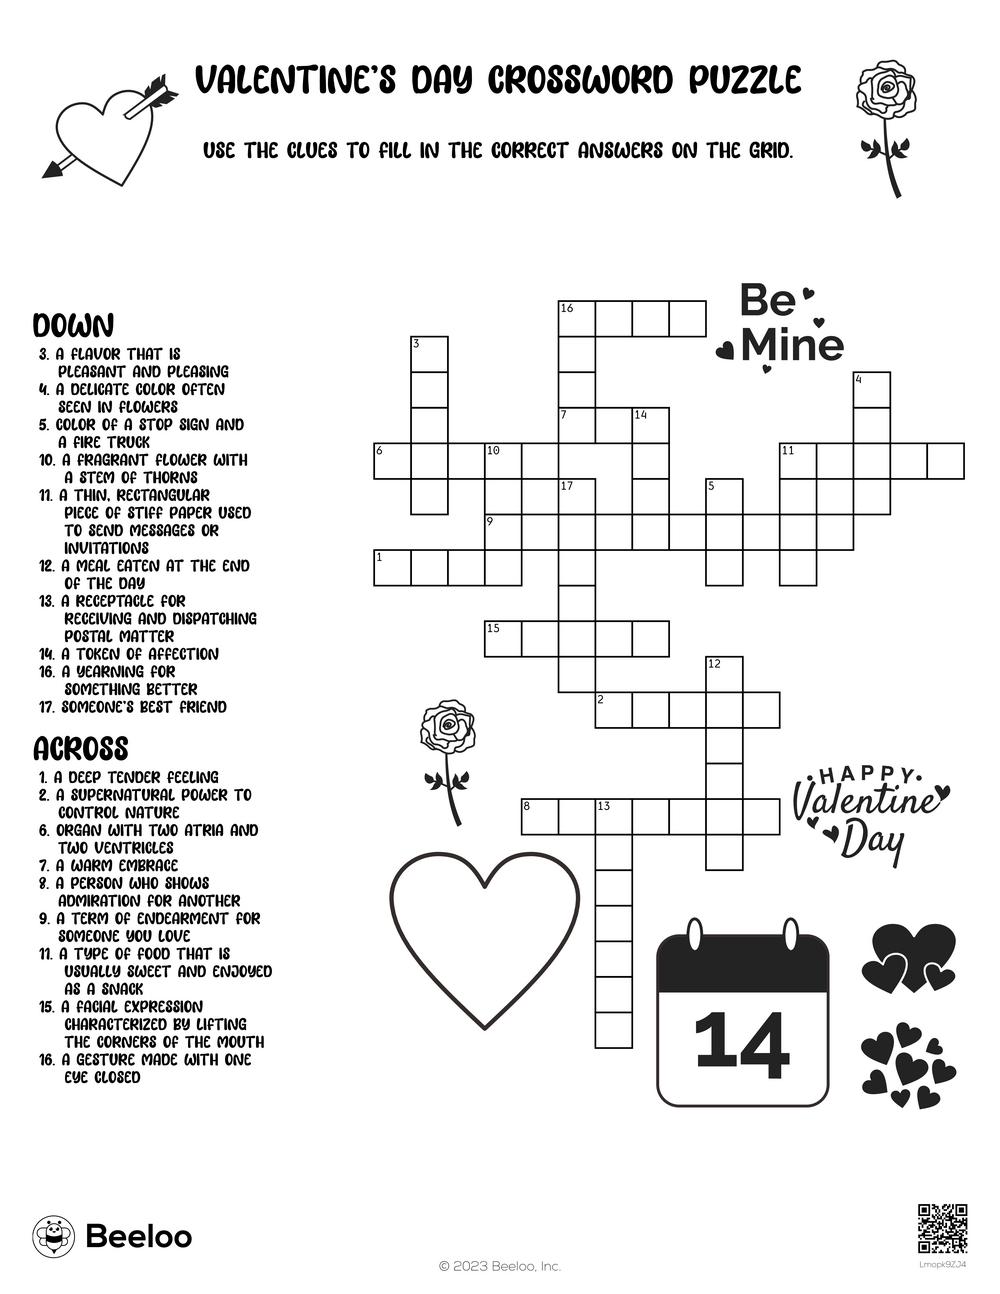 Valentines day crossword puzzle â printable crafts and activities for kids